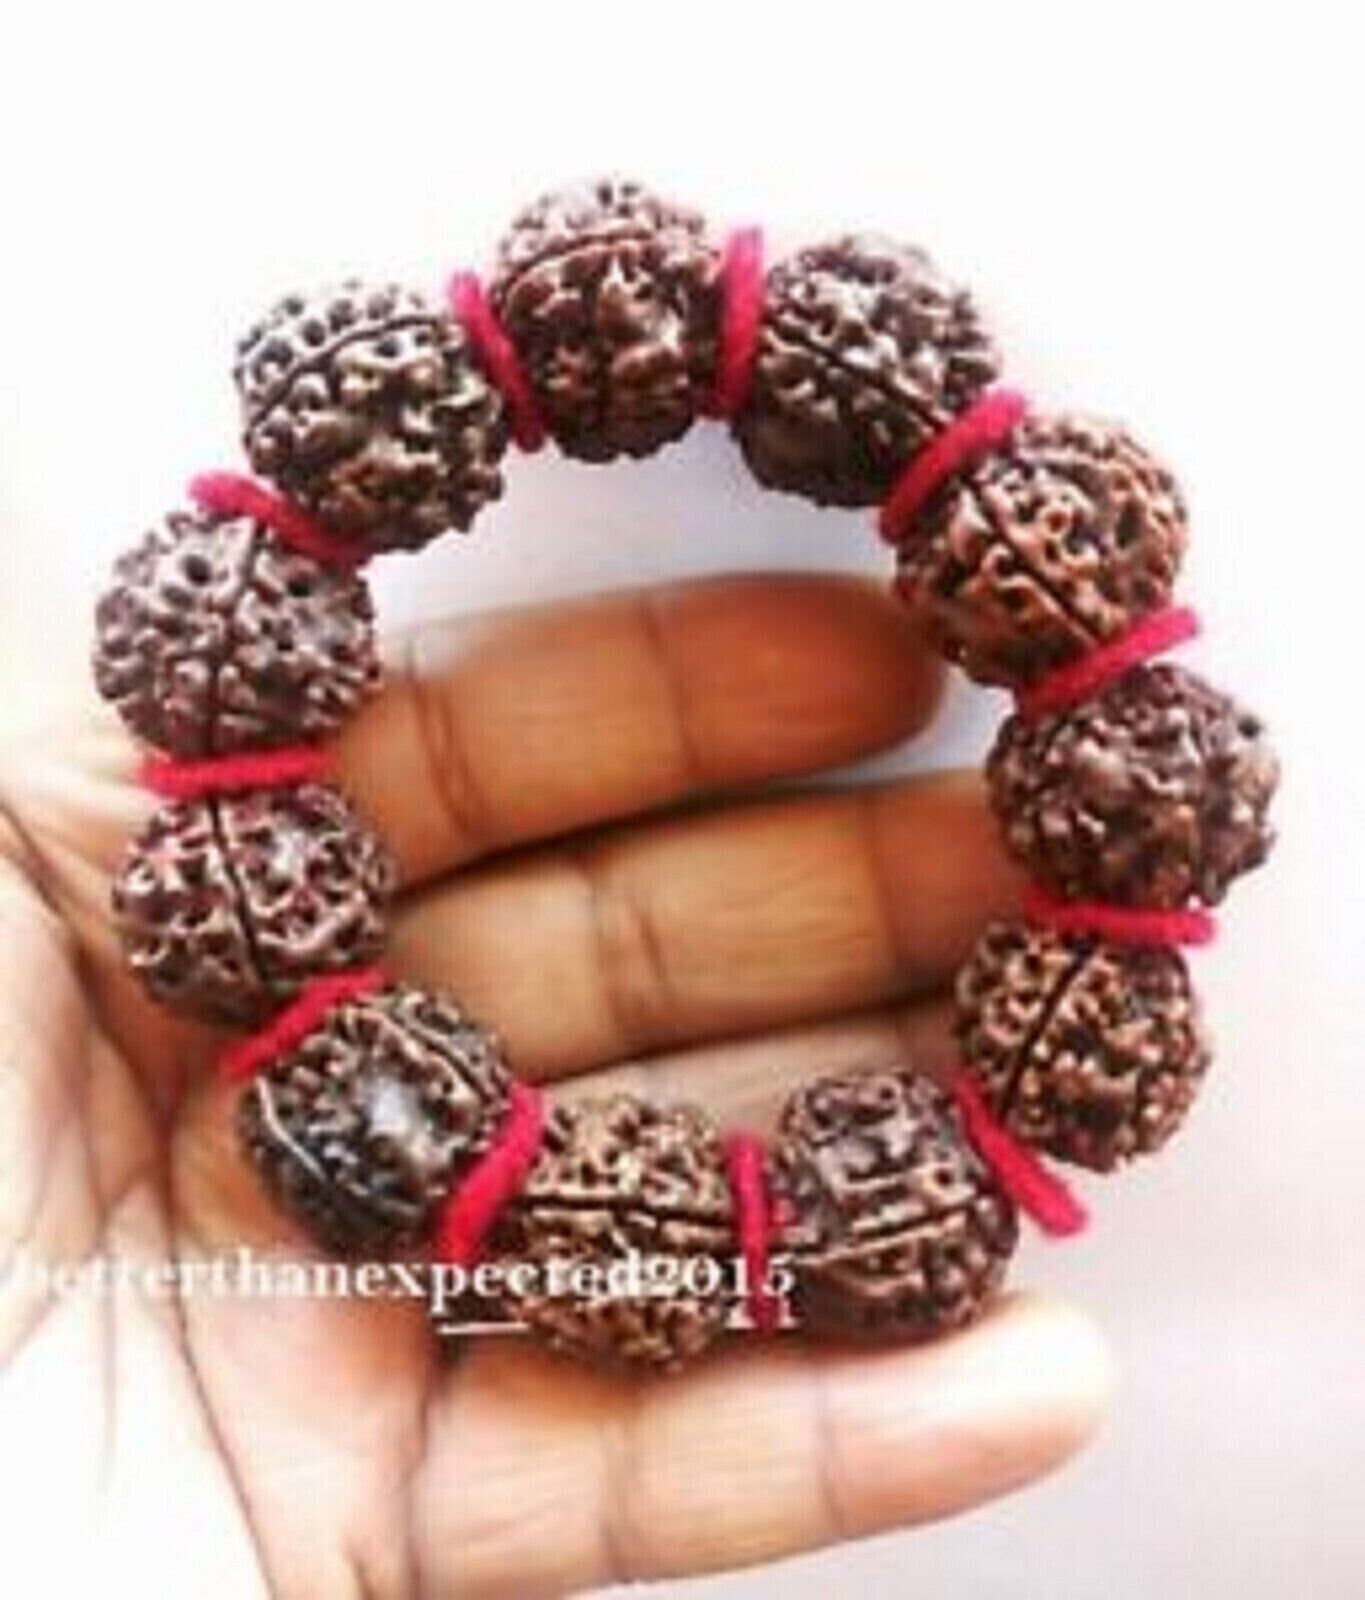 AA+++ Quality 5-Face Rudraksha Bracelet with Authentic 21-23mm Nepal Beads (11